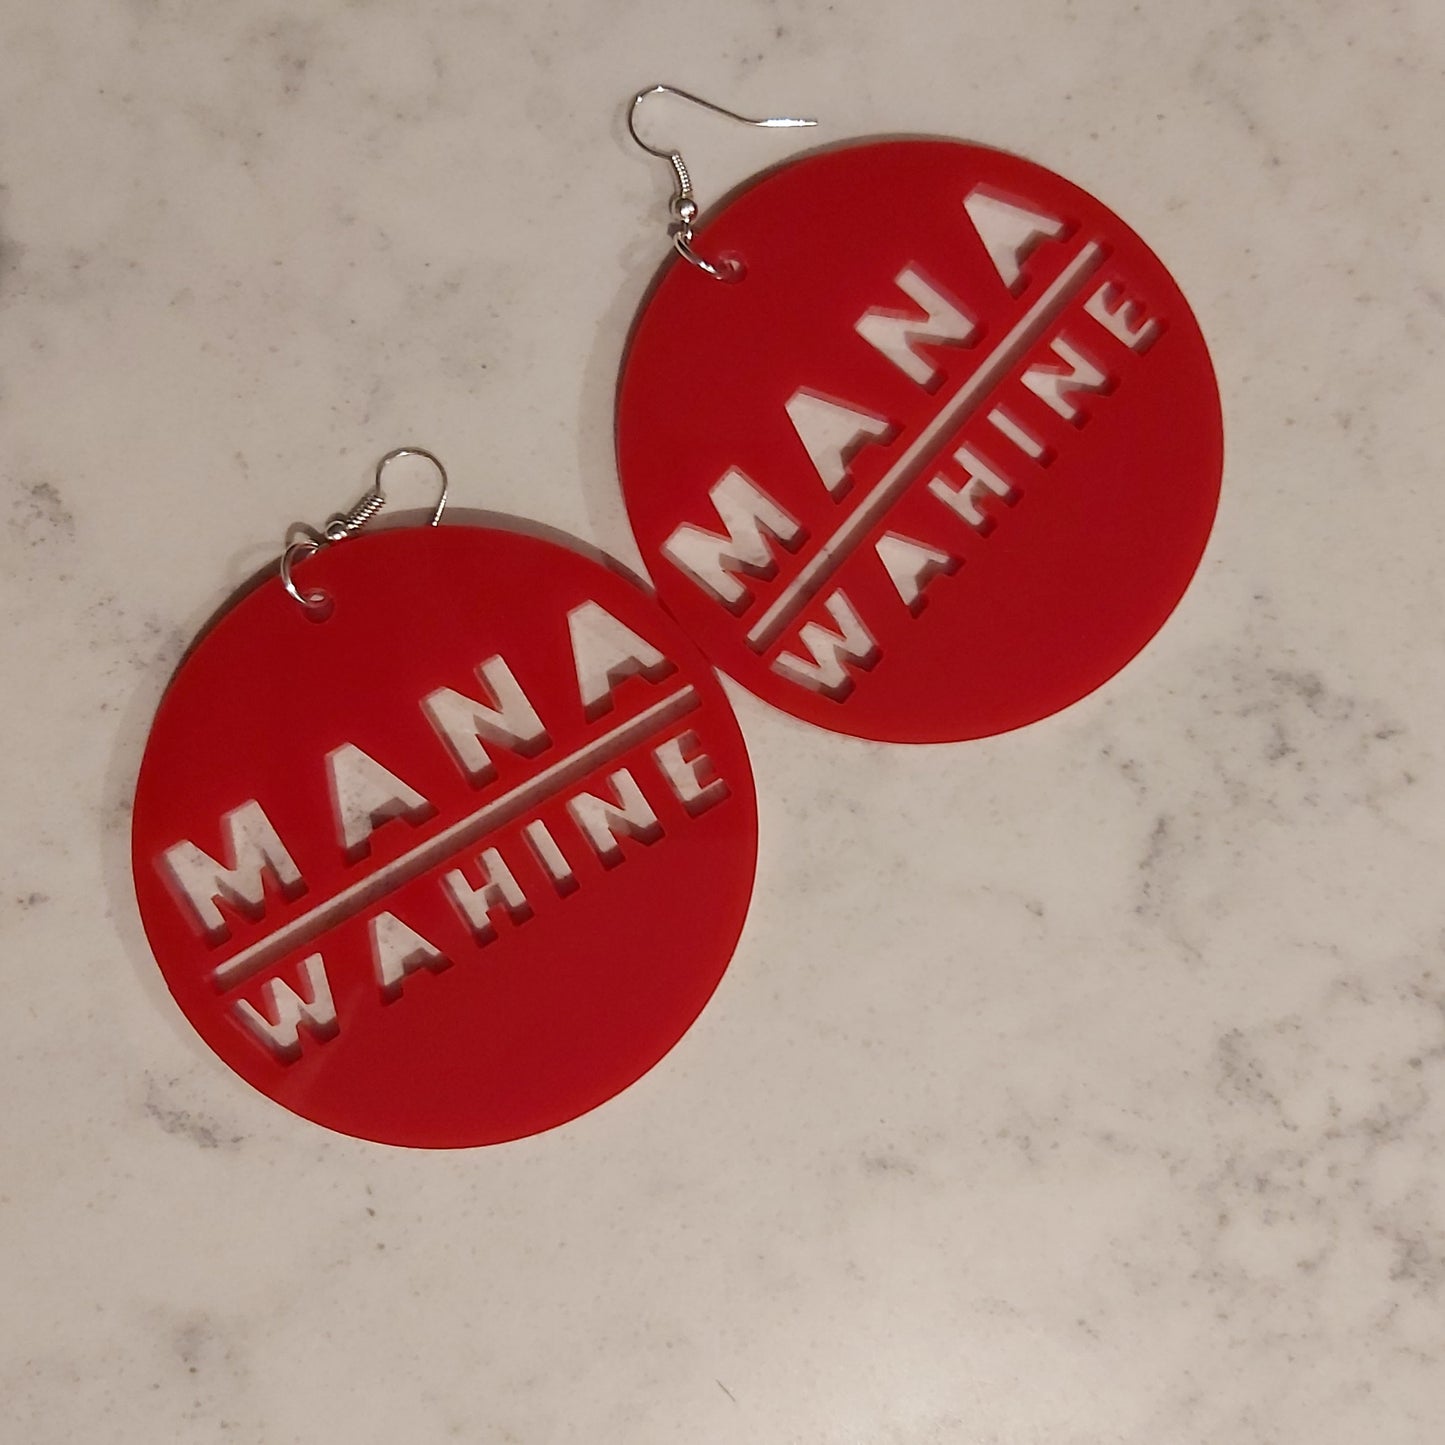 MANAWAHINE Cut-out (Large) Earrings